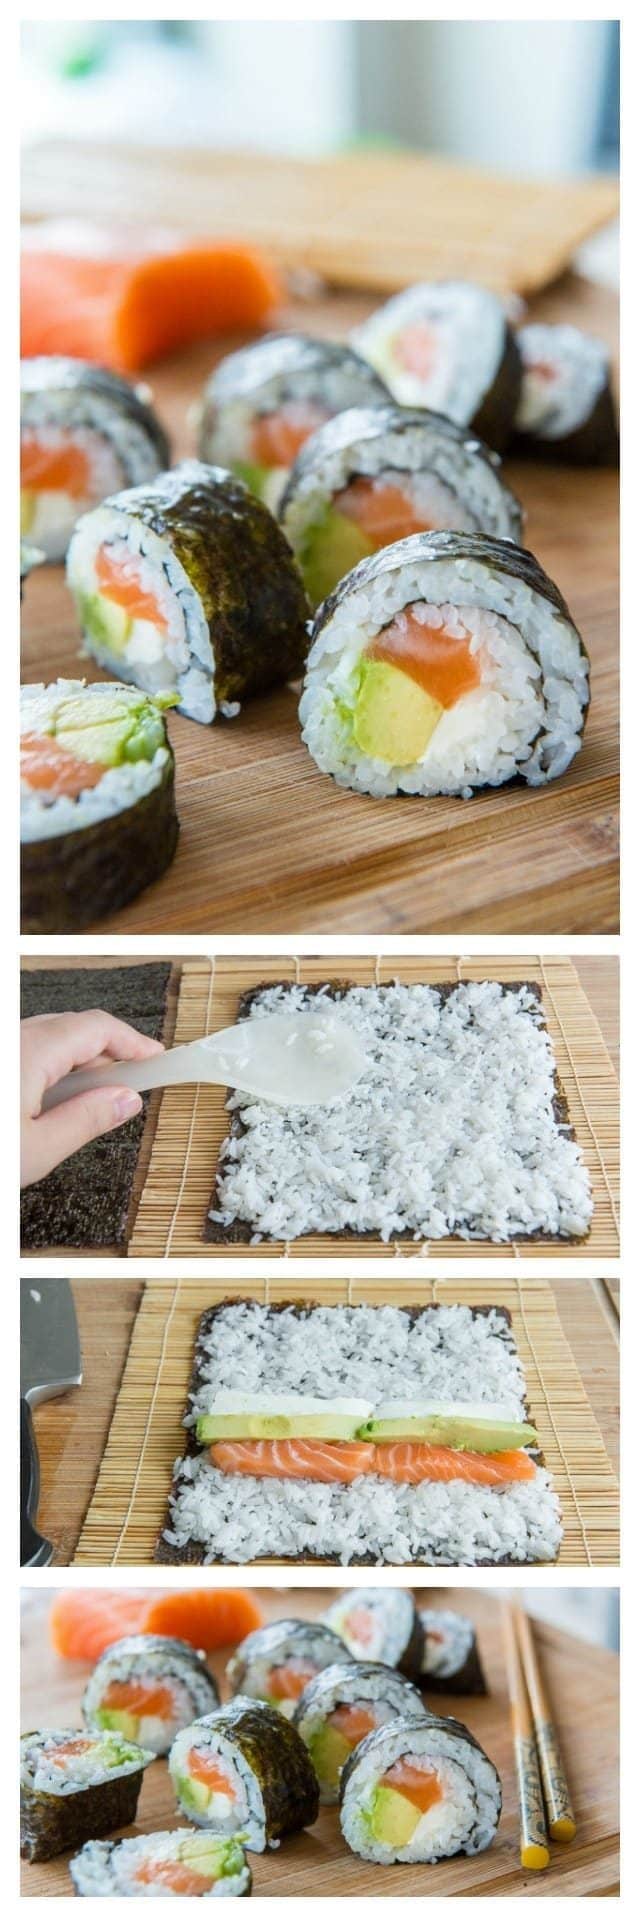 How to Make Sushi - Photo Collage Showing Process